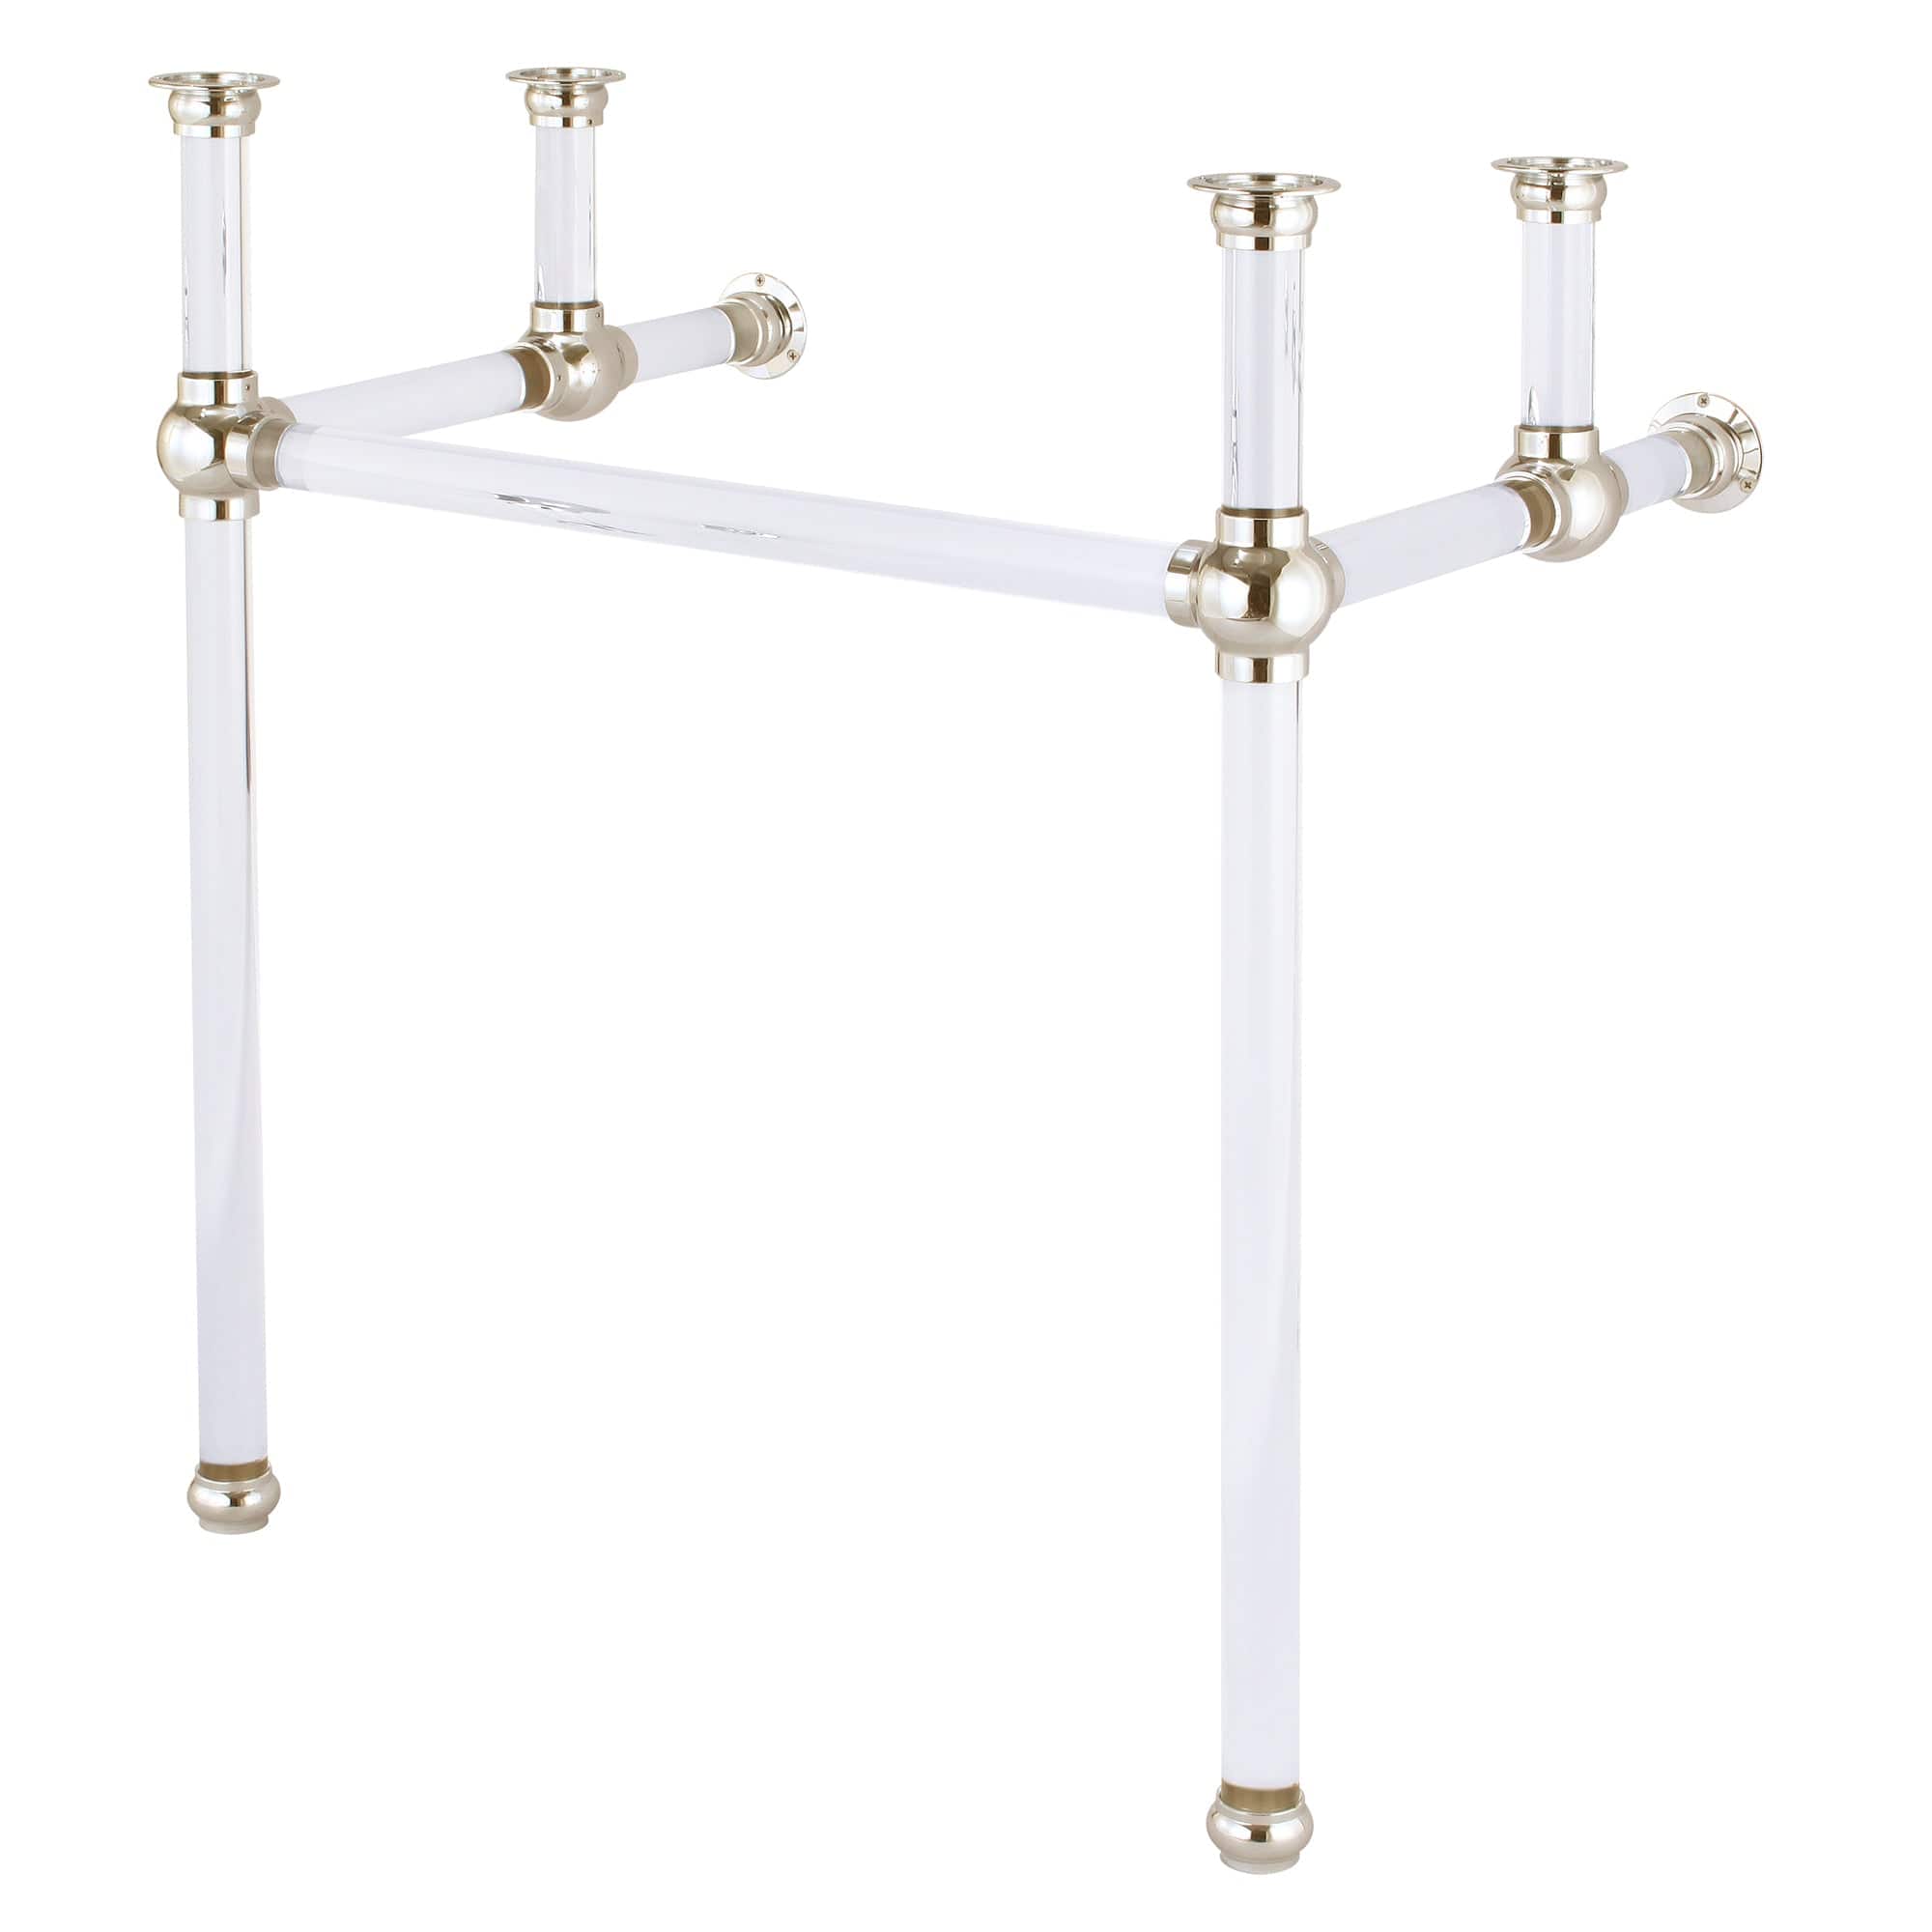 Empire 30 Inch Wide Single Wash Stand Only in Polished Nickel (PVD) Finish - Molaix732030762503EP30A-0500